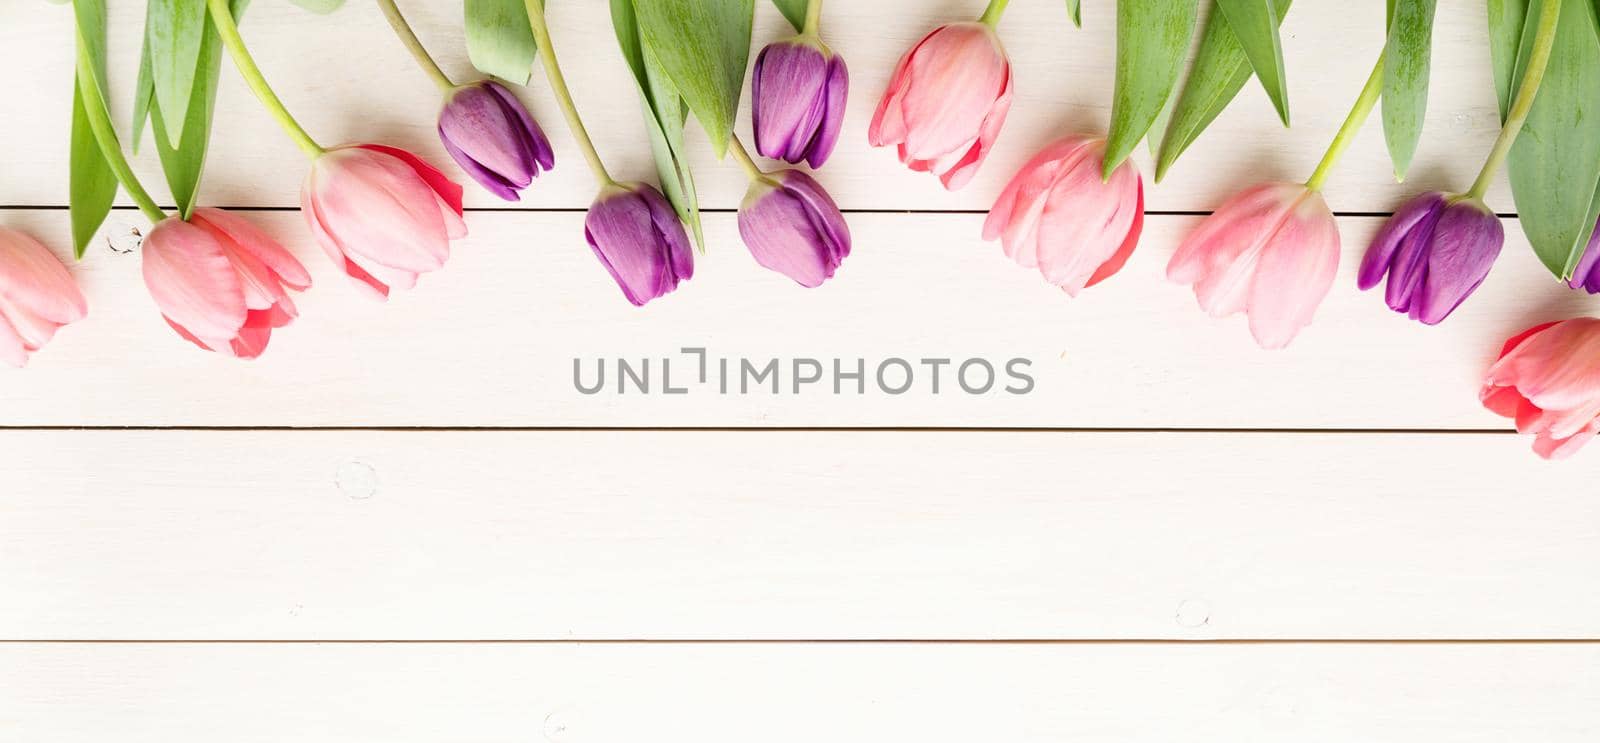 Spring, flowers concept. Pink and purple tulips over white wooden table background, banner